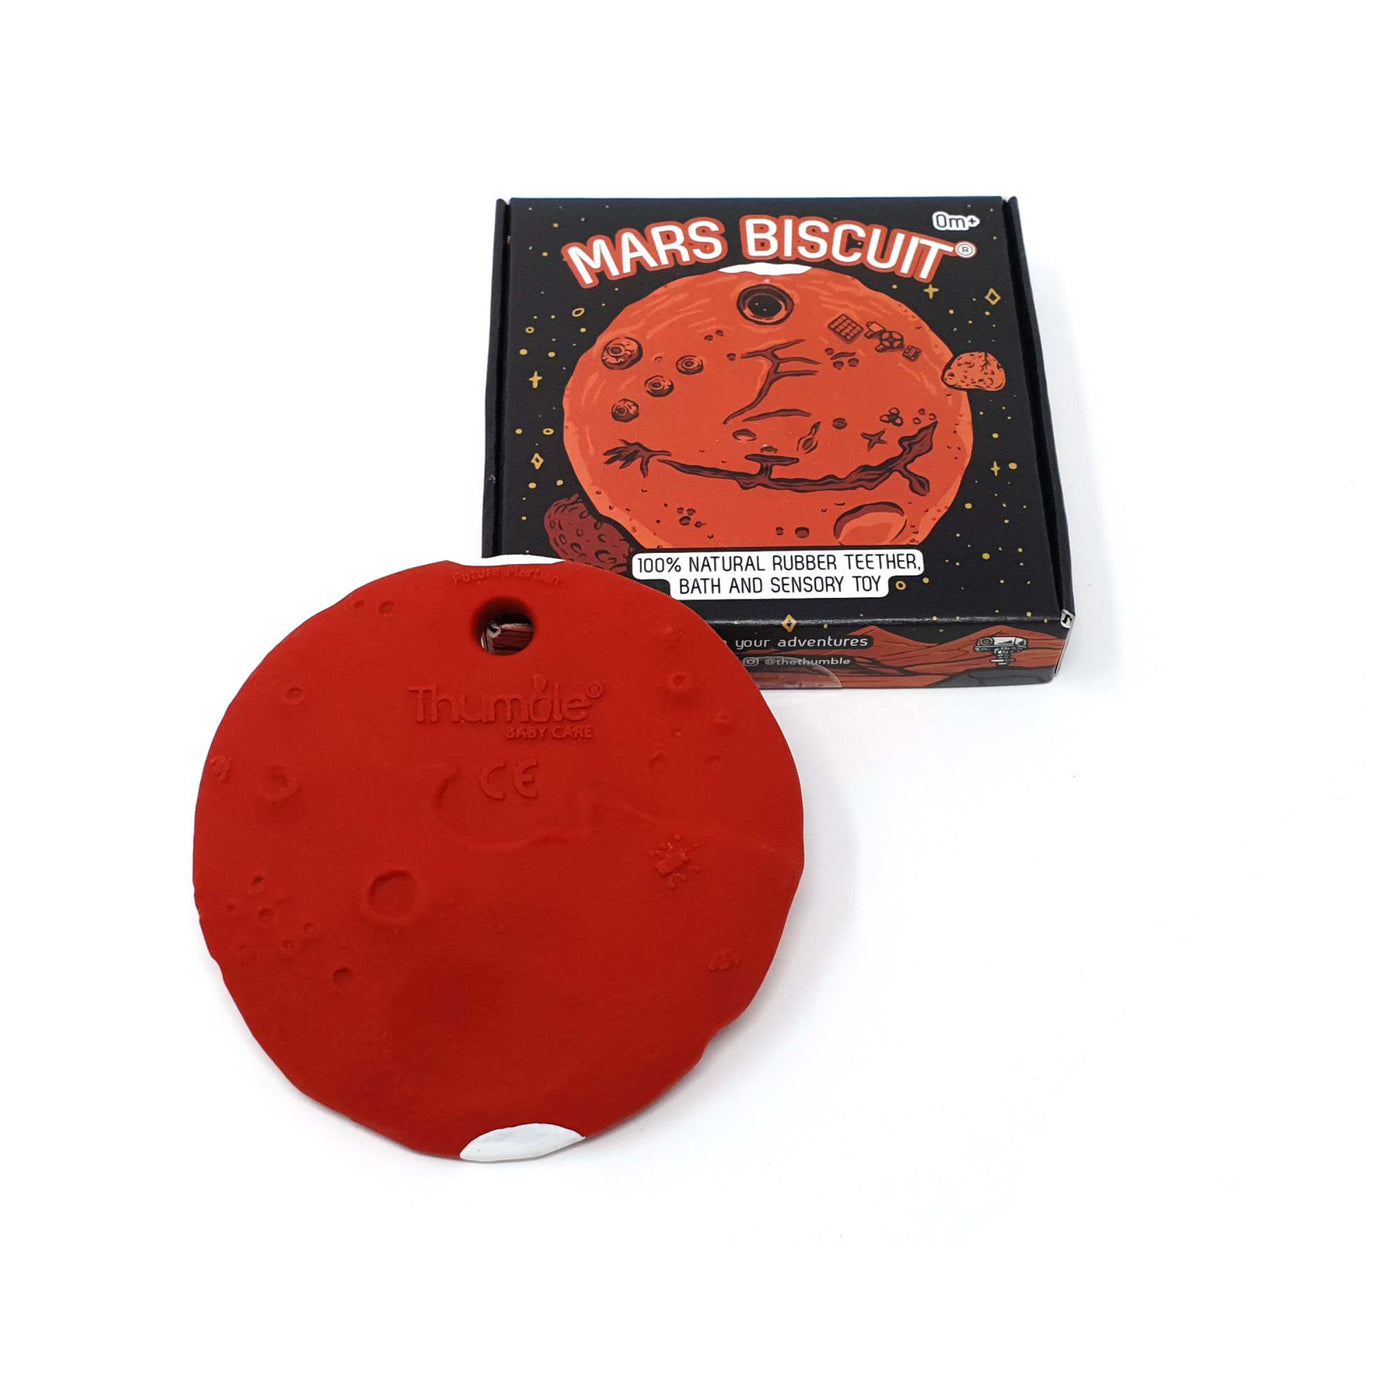 Mars Biscuit toy is made from ethically sourced natural rubber with fully recyclable box packaging